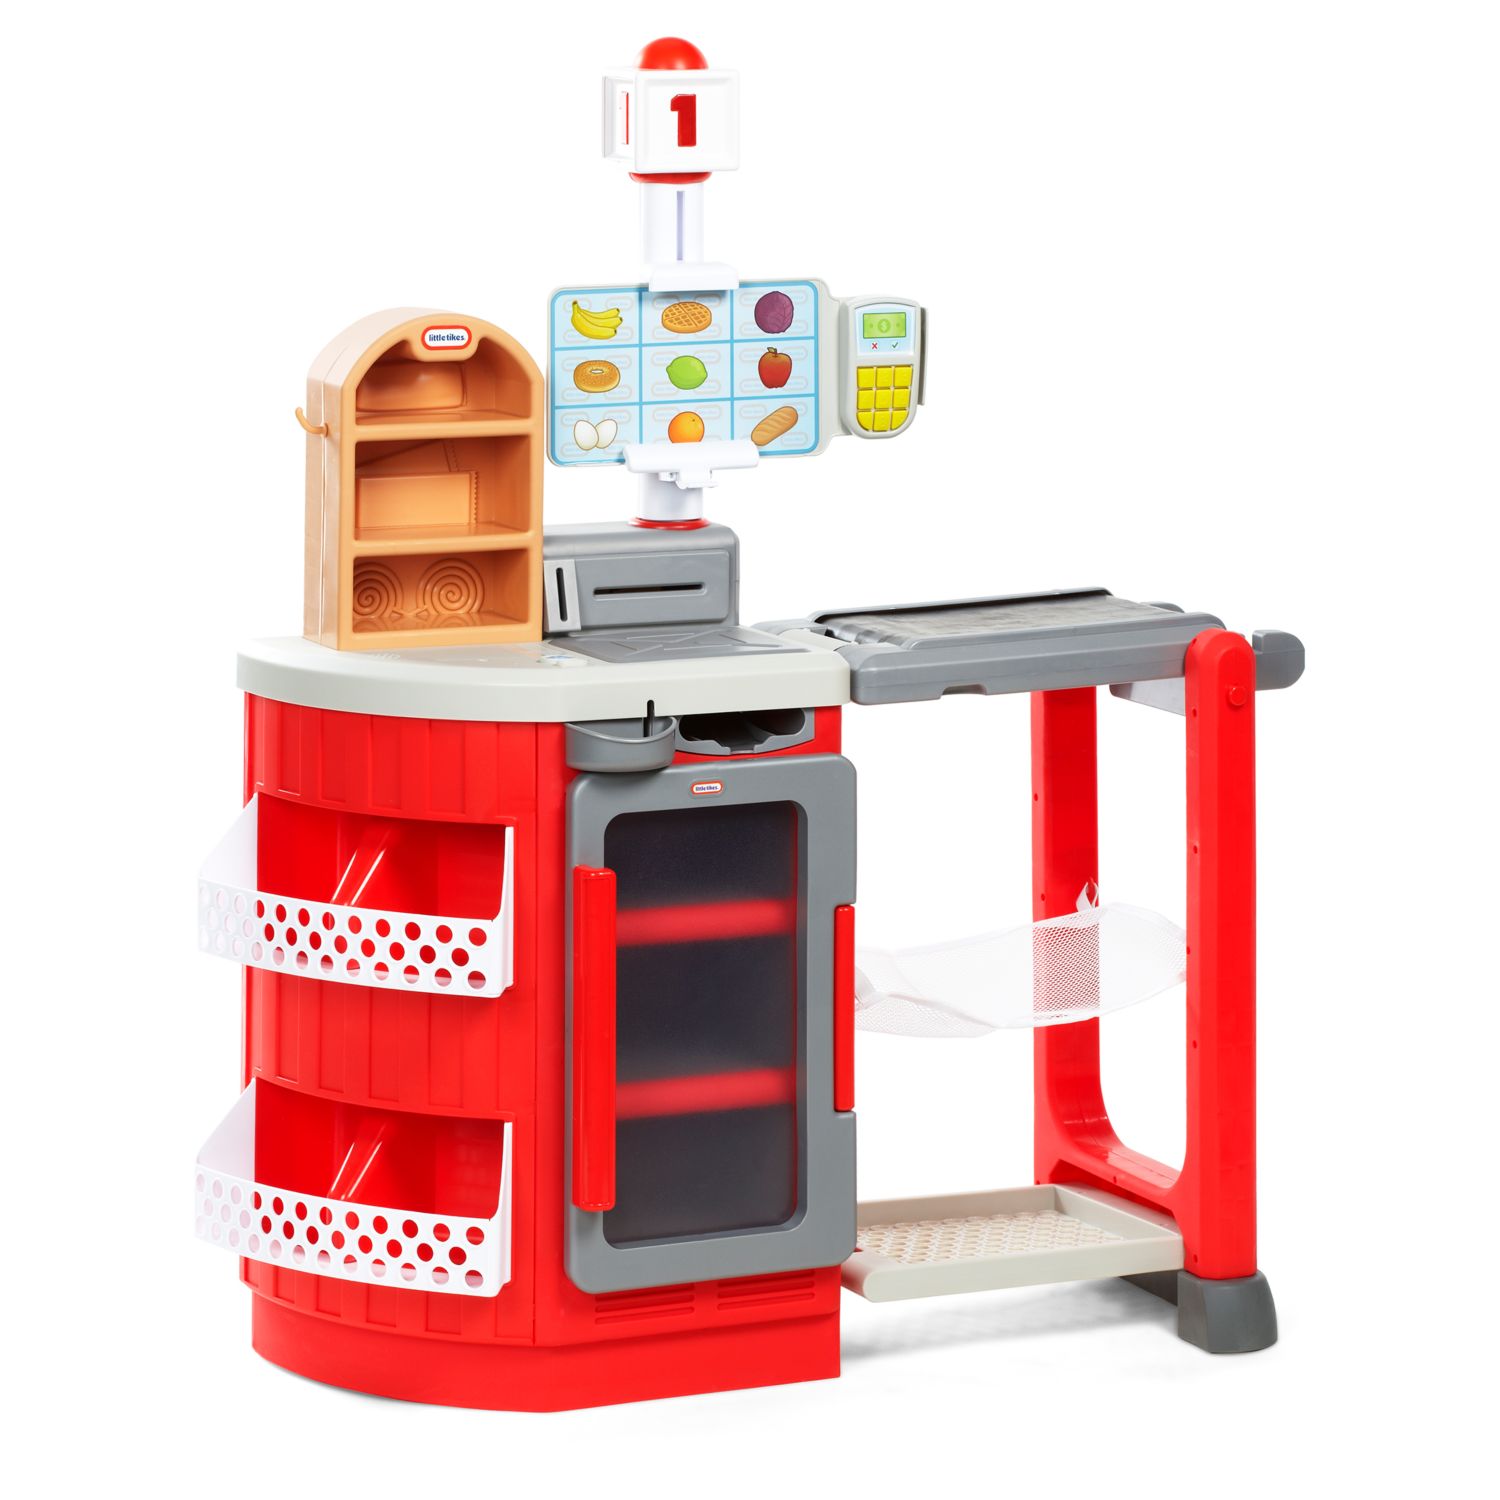 Shop And Learn Little Tikes Online, 50% OFF | www.pegasusaerogroup.com